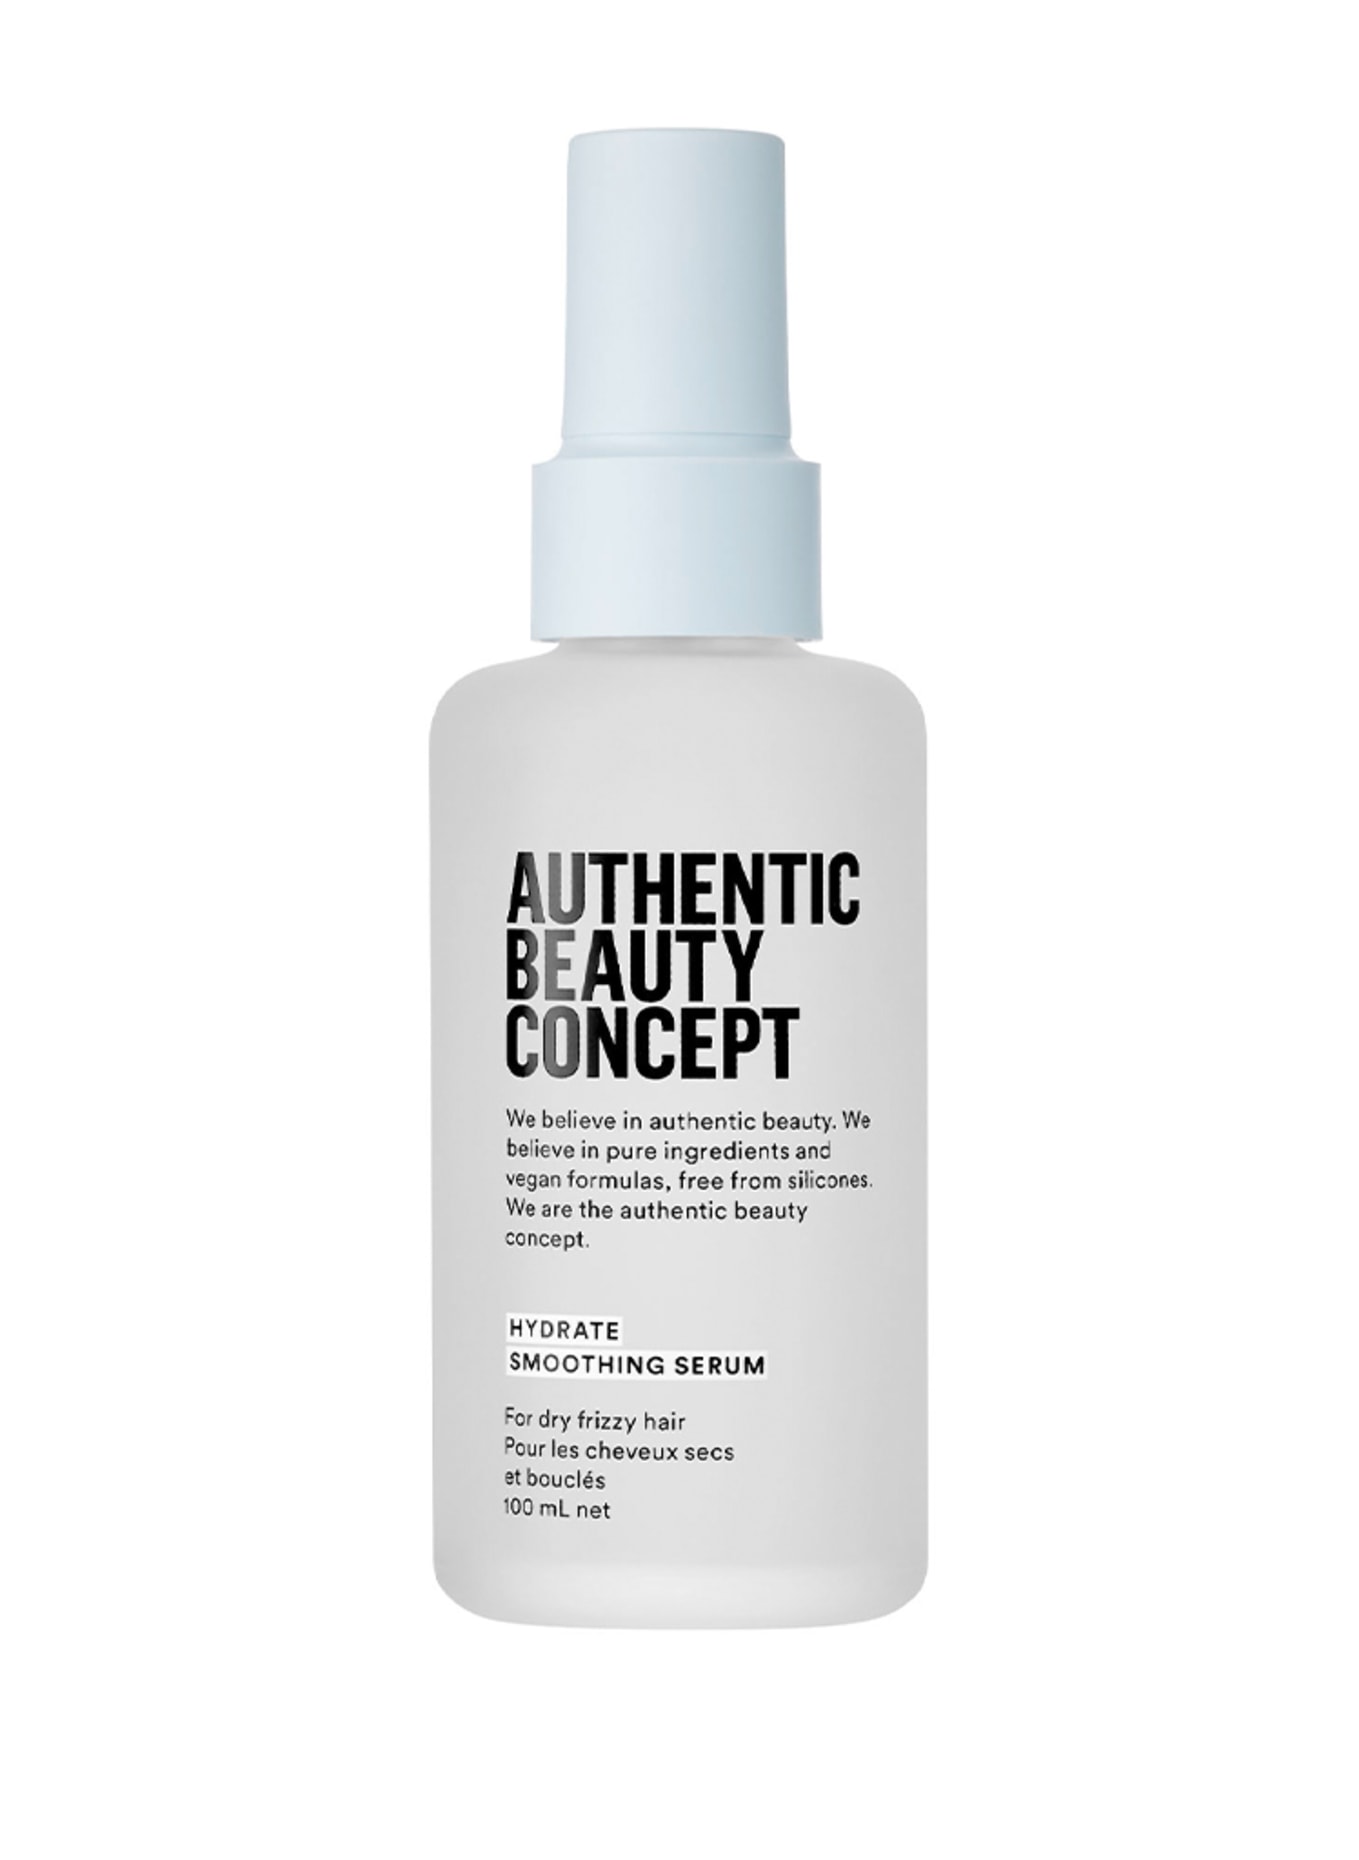 AUTHENTIC BEAUTY CONCEPT HYDRATE SMOOTHING SERUM (Bild 1)